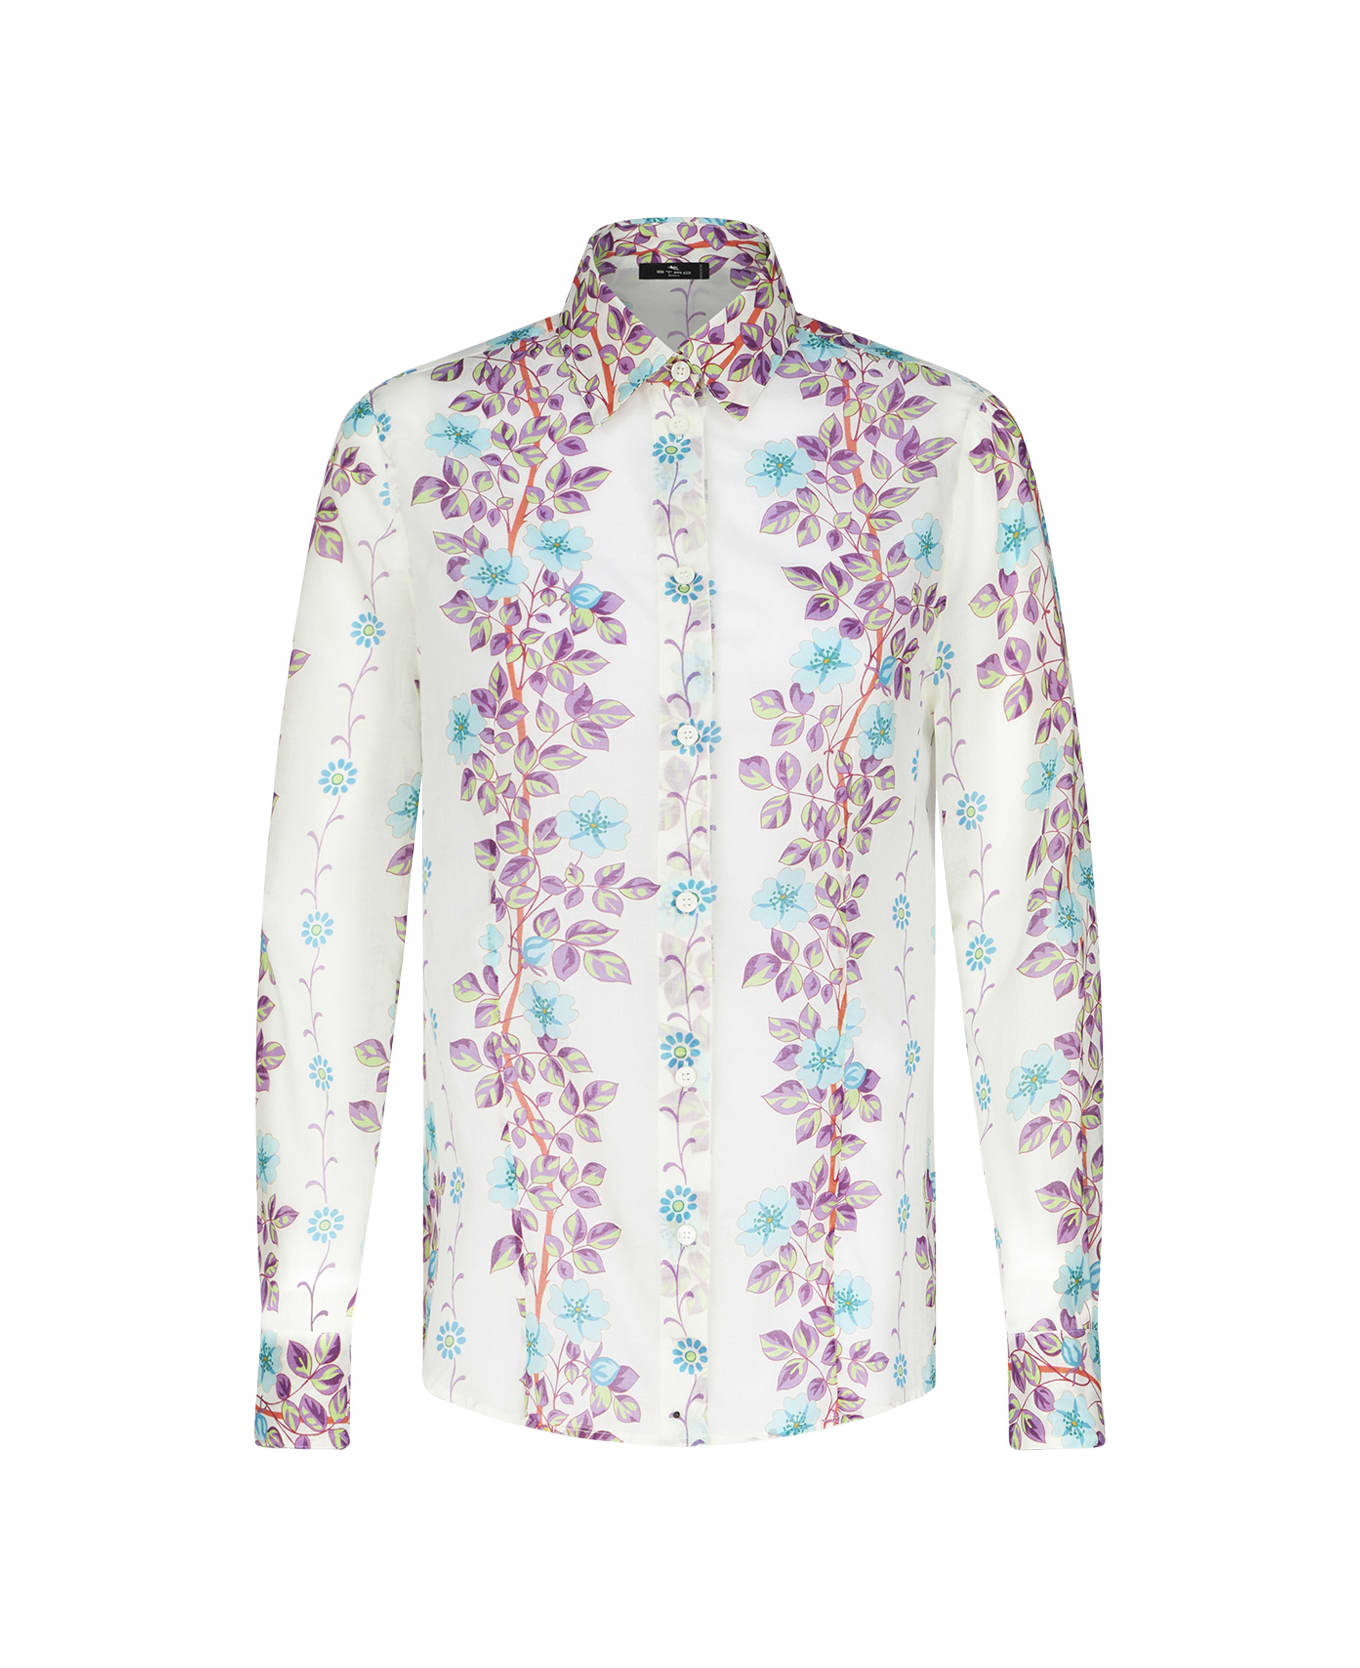 Etro White Shirt With Placed Floral Print - White